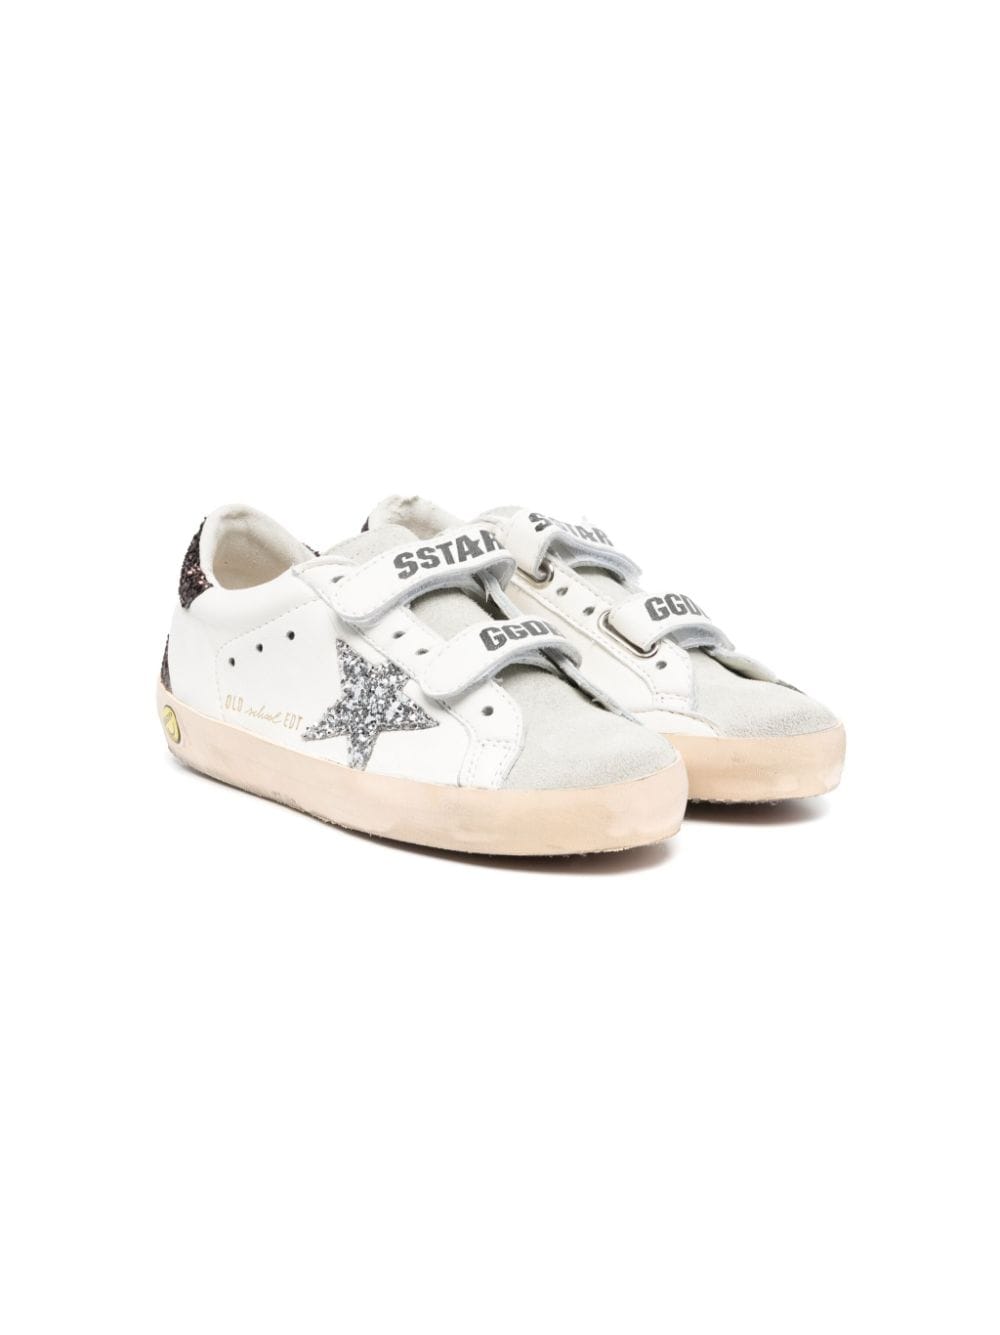 Image 1 of Golden Goose Kids Old School touch-strap sneakers